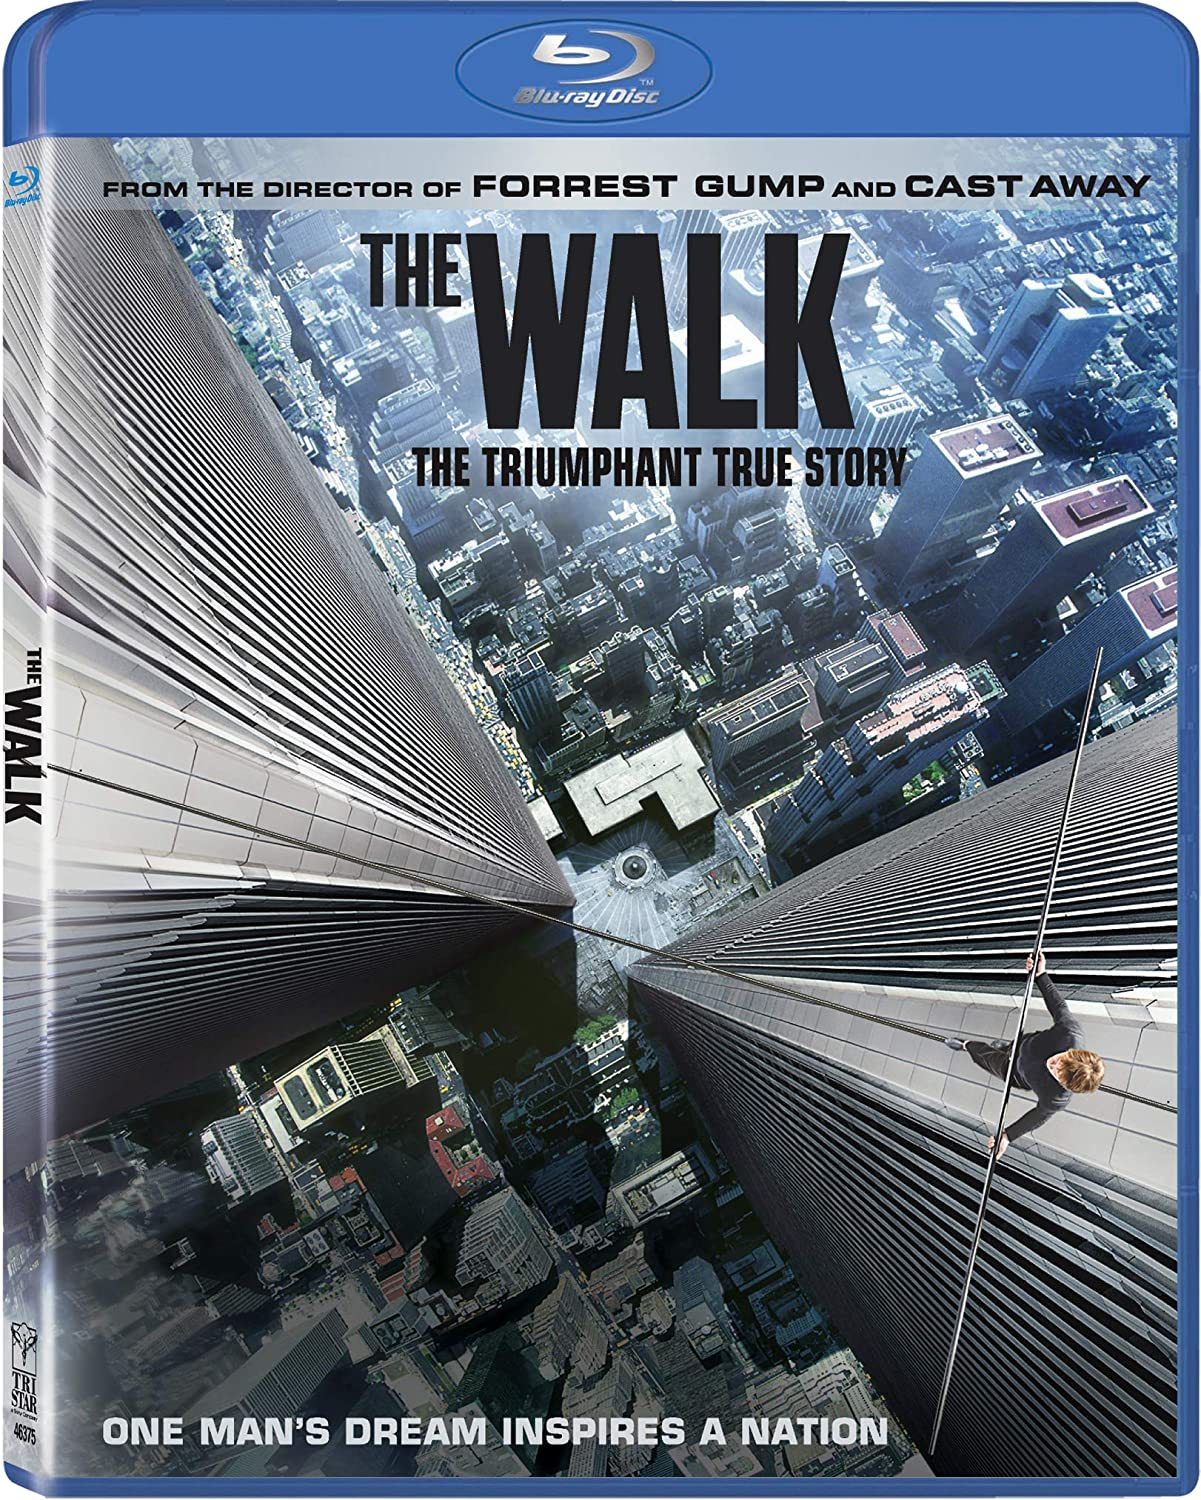 Sony Pictures The walk blu-ray movie-one man's dream inspires a nation- brand new